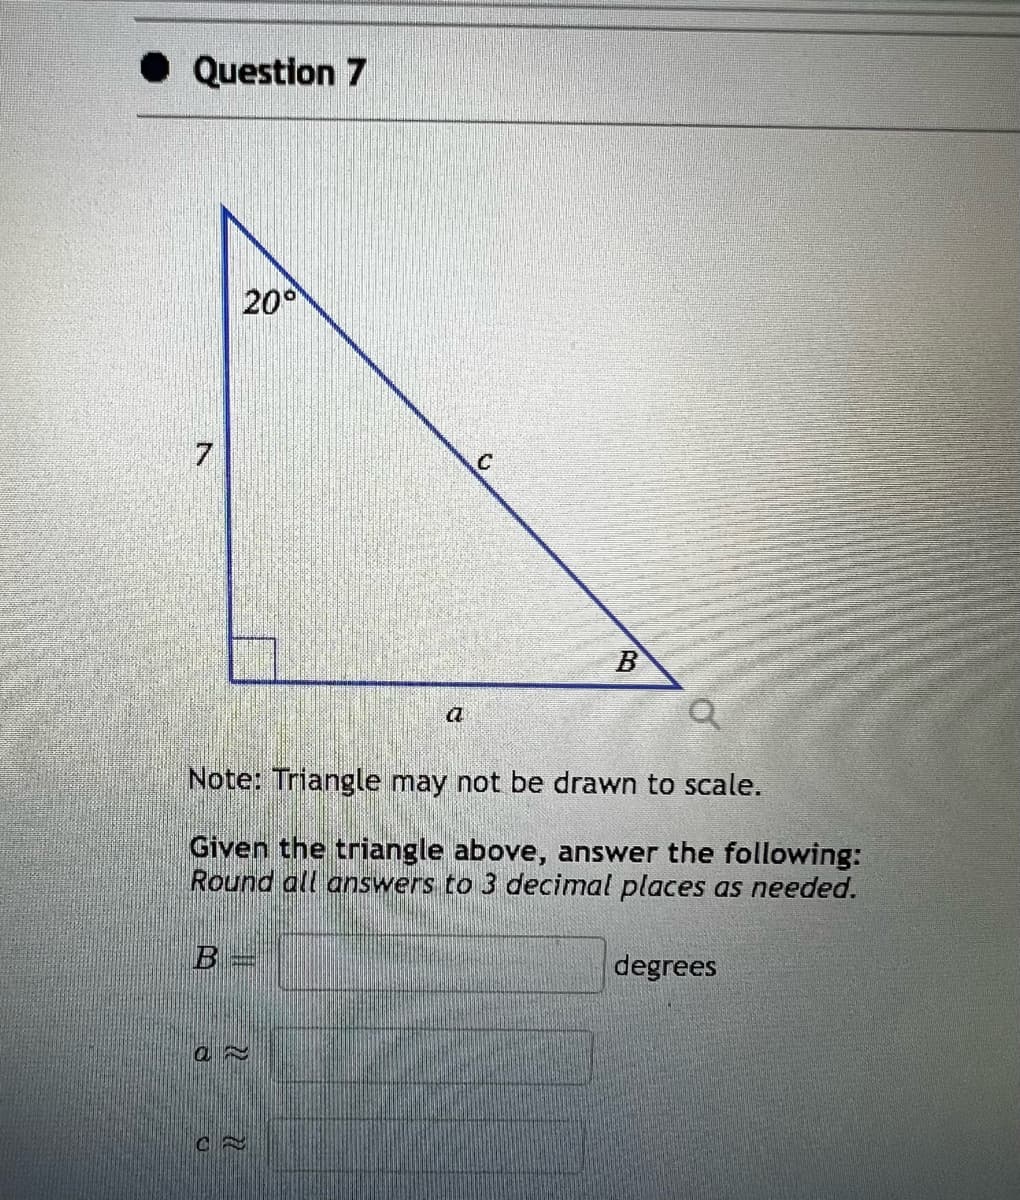 Question 7
7
20°
B=
an
a
Note: Triangle may not be drawn to scale.
Given the triangle above, answer the following:
Round all answers to 3 decimal places as needed.
CE
C
B
degrees